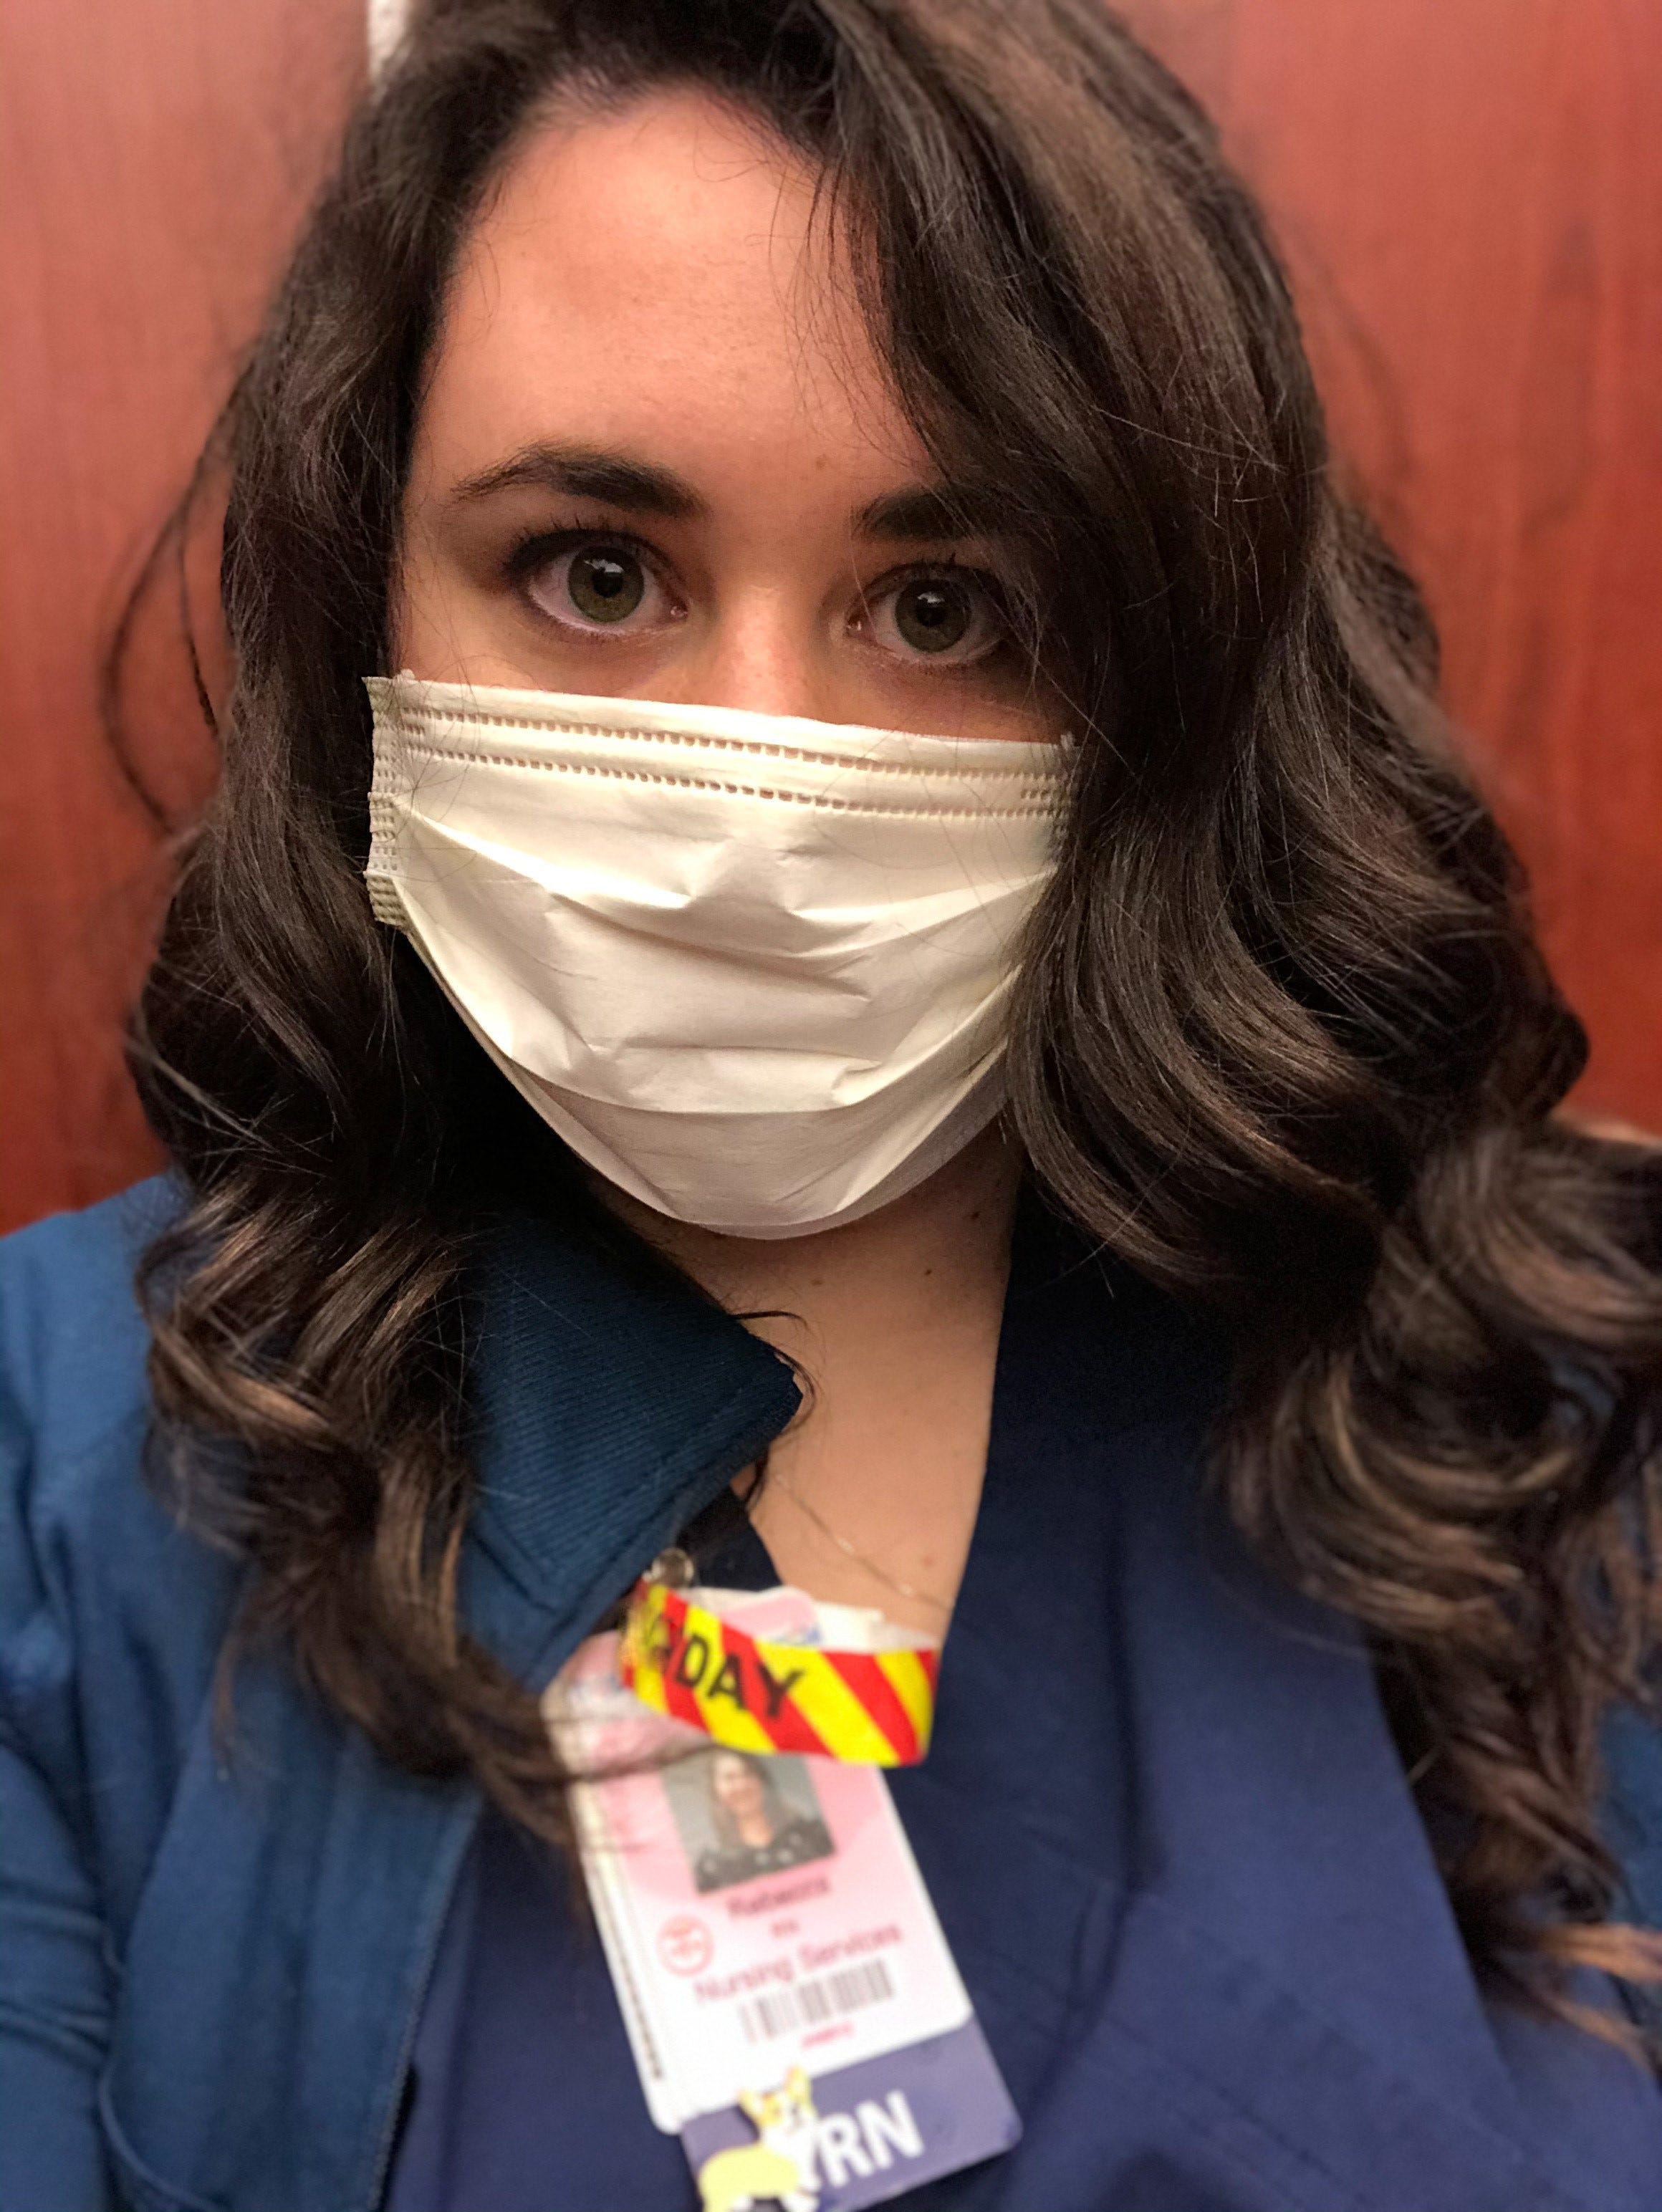 Becca Leonard is a nurse in the obstetrics emergency department of a Nashville hospital. With the coronavirus pandemic creeping through the city, "I am dreading what comes next," she said.